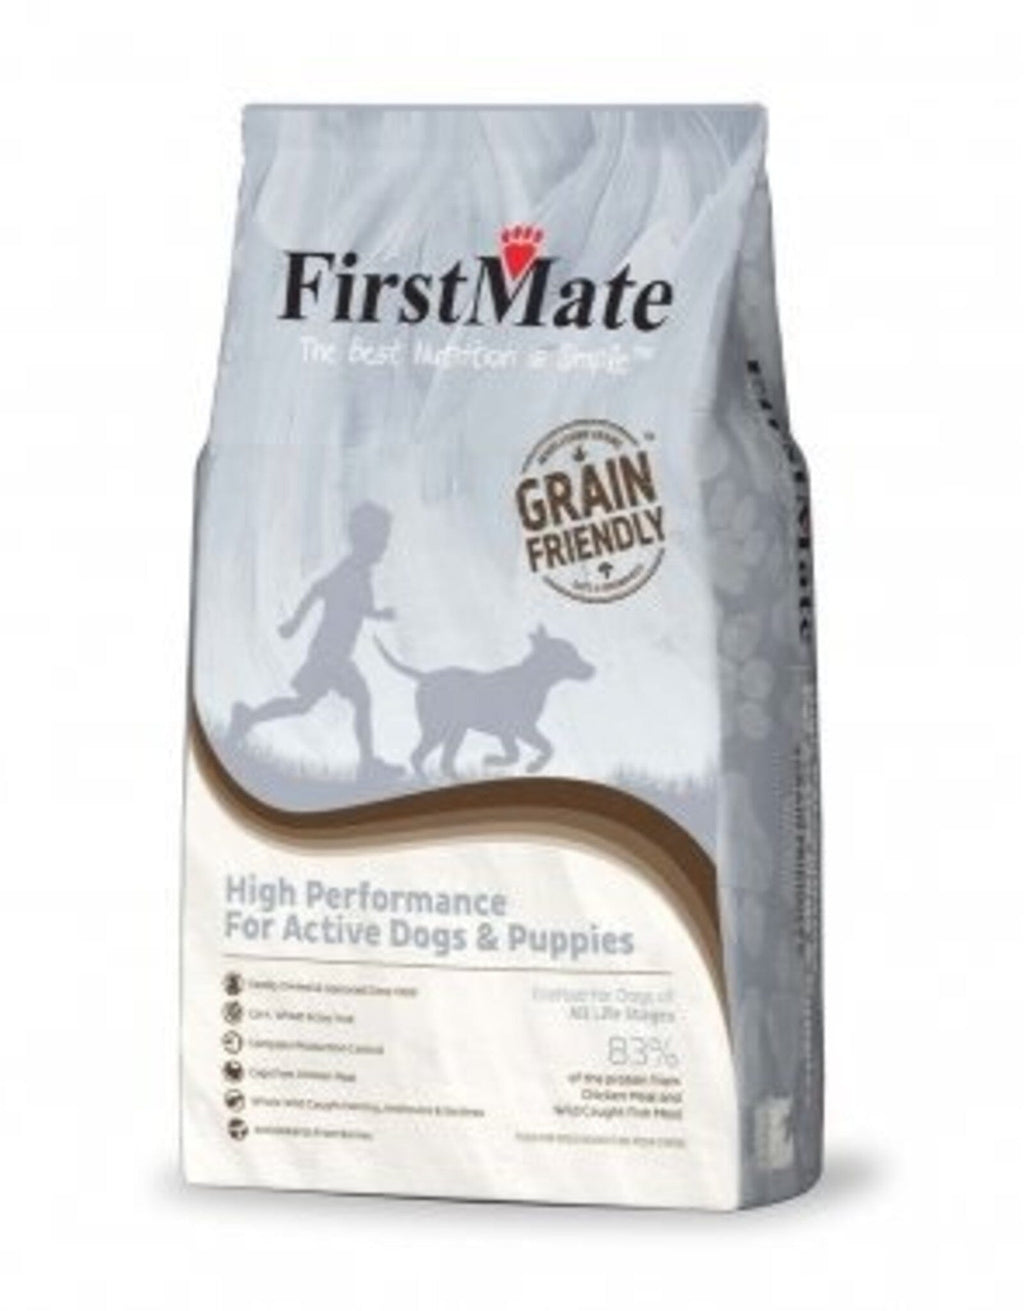 Firstmate Grain Friendly High Performance Puppy Dry Dog Food  